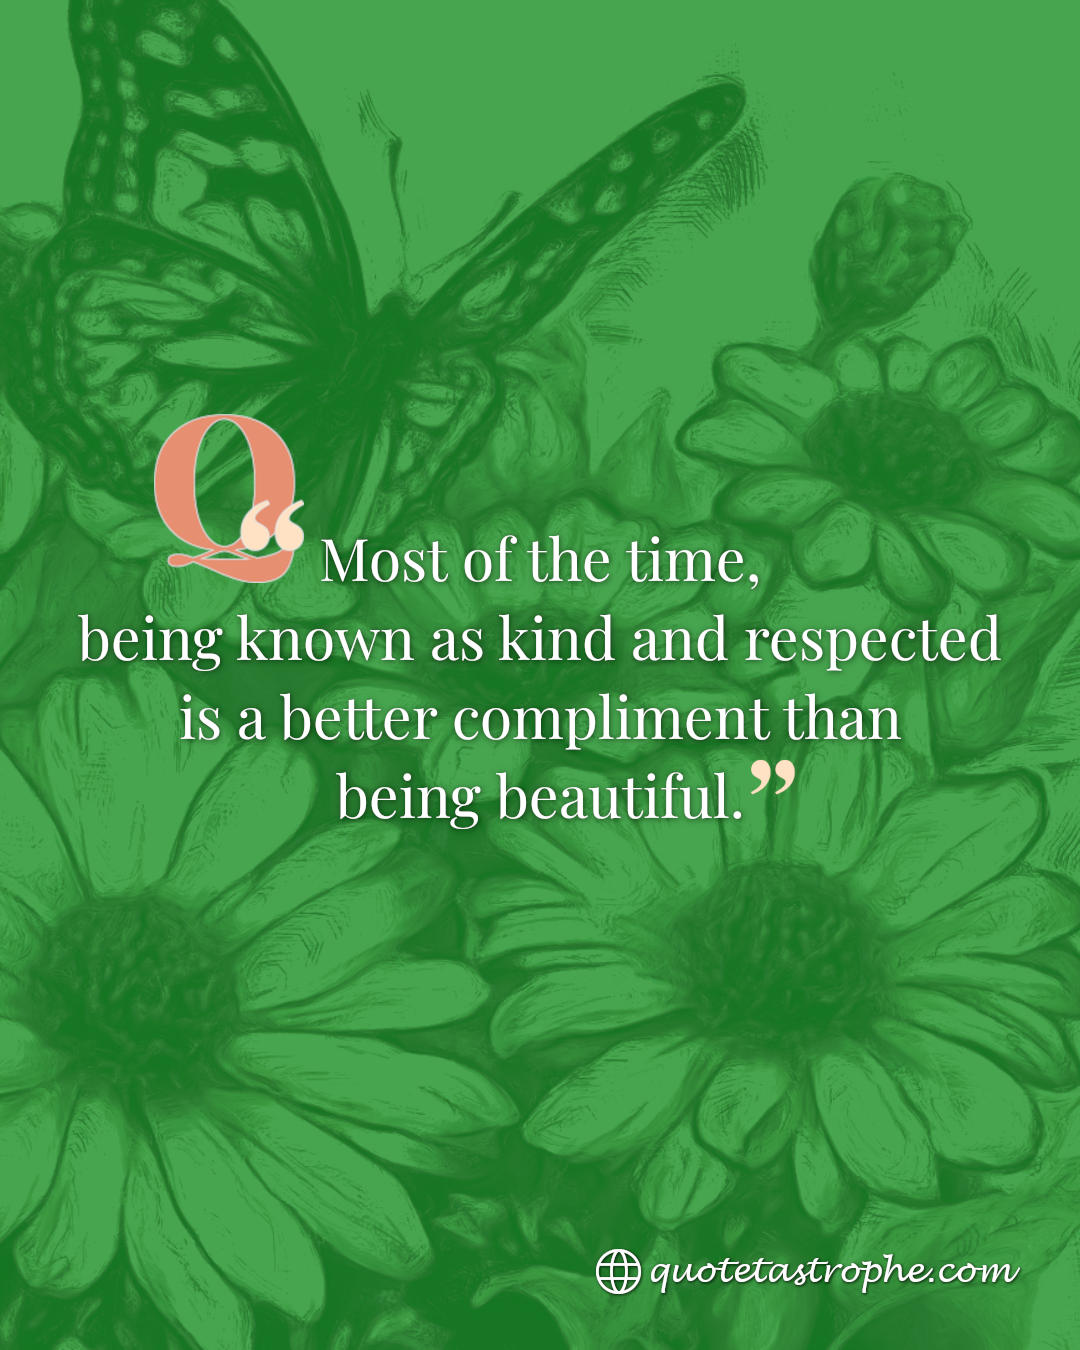 Being Known as Kind and Respected is a Better Compliment